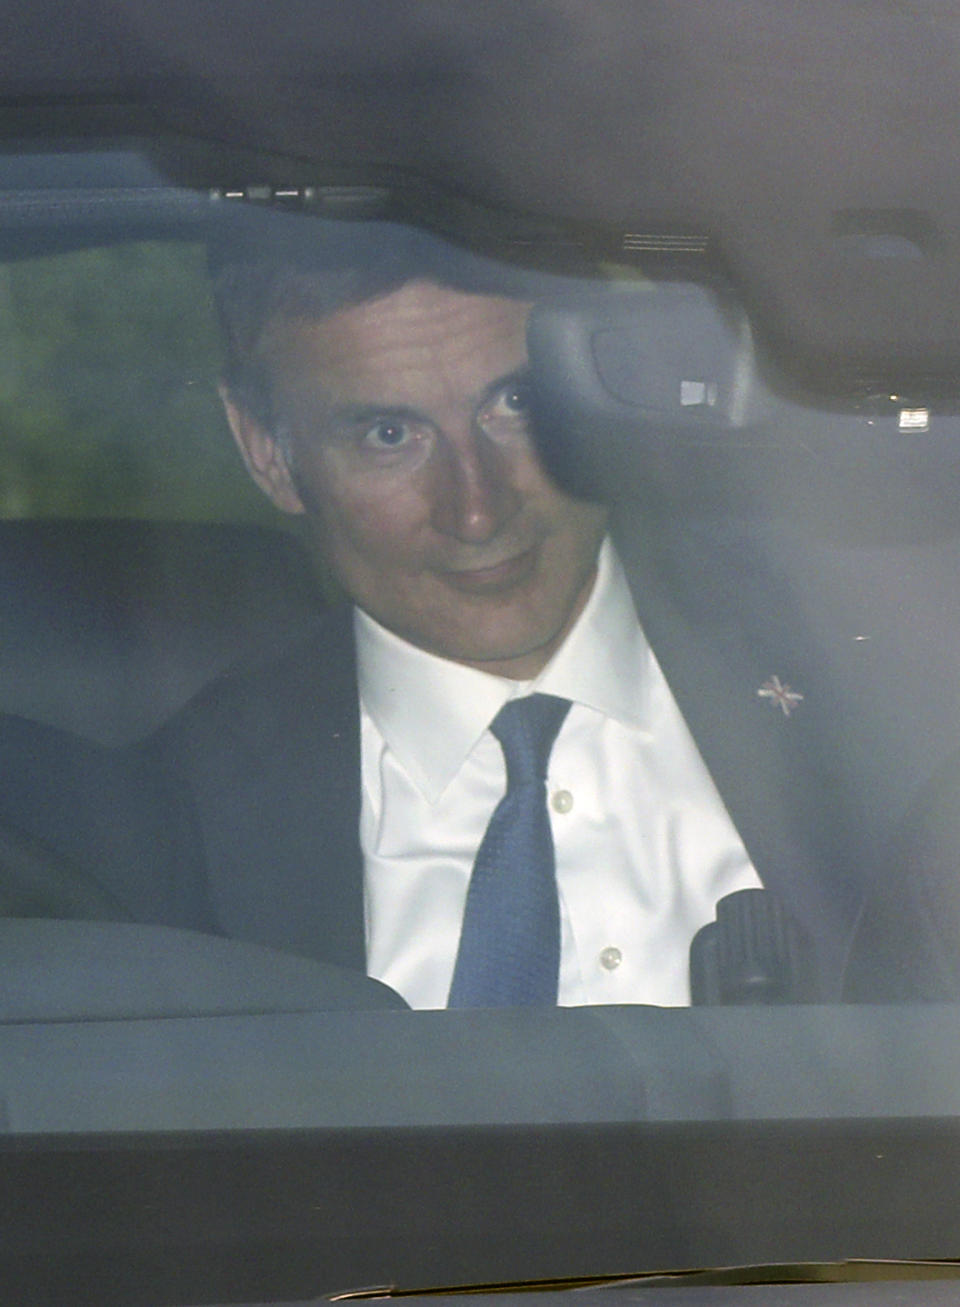 Conservative party leadership contender Jeremy Hunt arrives at the television studios ahead of a scheduled live television debate for the Conservative Party leadership candidates, in London, Sunday June 16, 2019. Five out of the six candidates will appear in the first TV debate, with Boris Johnson declining to take part, although other candidates accuse him of trying to avoid scrutiny. (Yui Mok/PA via AP)